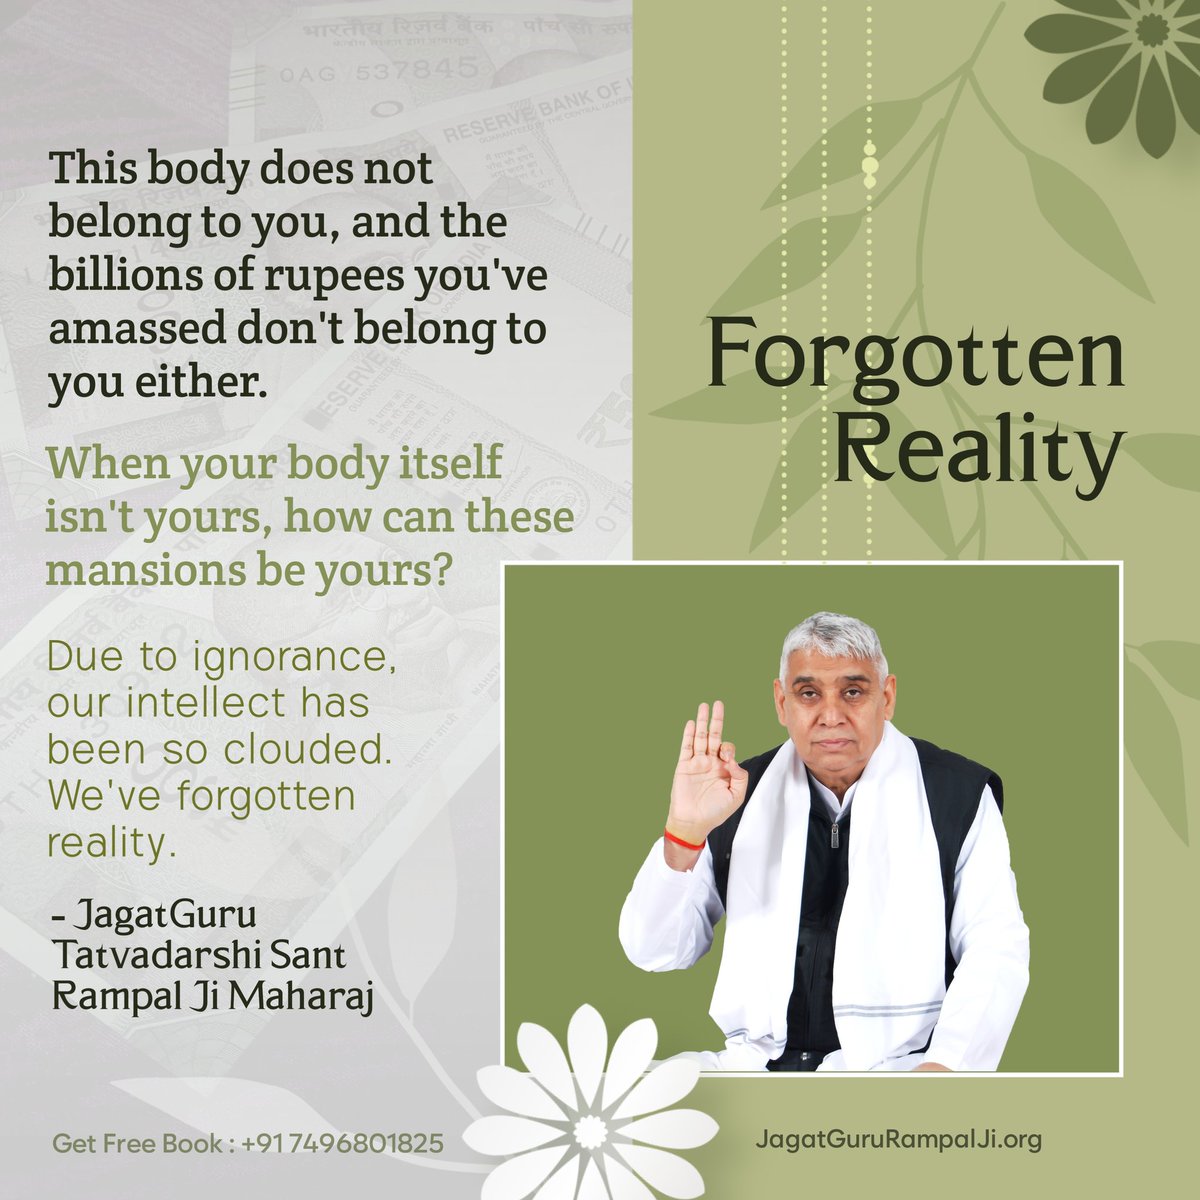 #GodMorningTuesday
Forgotten Reality

This body does not belong to you, and the billons of rupees you've amassed don't belong to you either.
When your body itself isn't yours, how can these mansions be yours?
Visit Saint Rampal Ji Maharaj YouTube Channel
#tuesdaymotivations